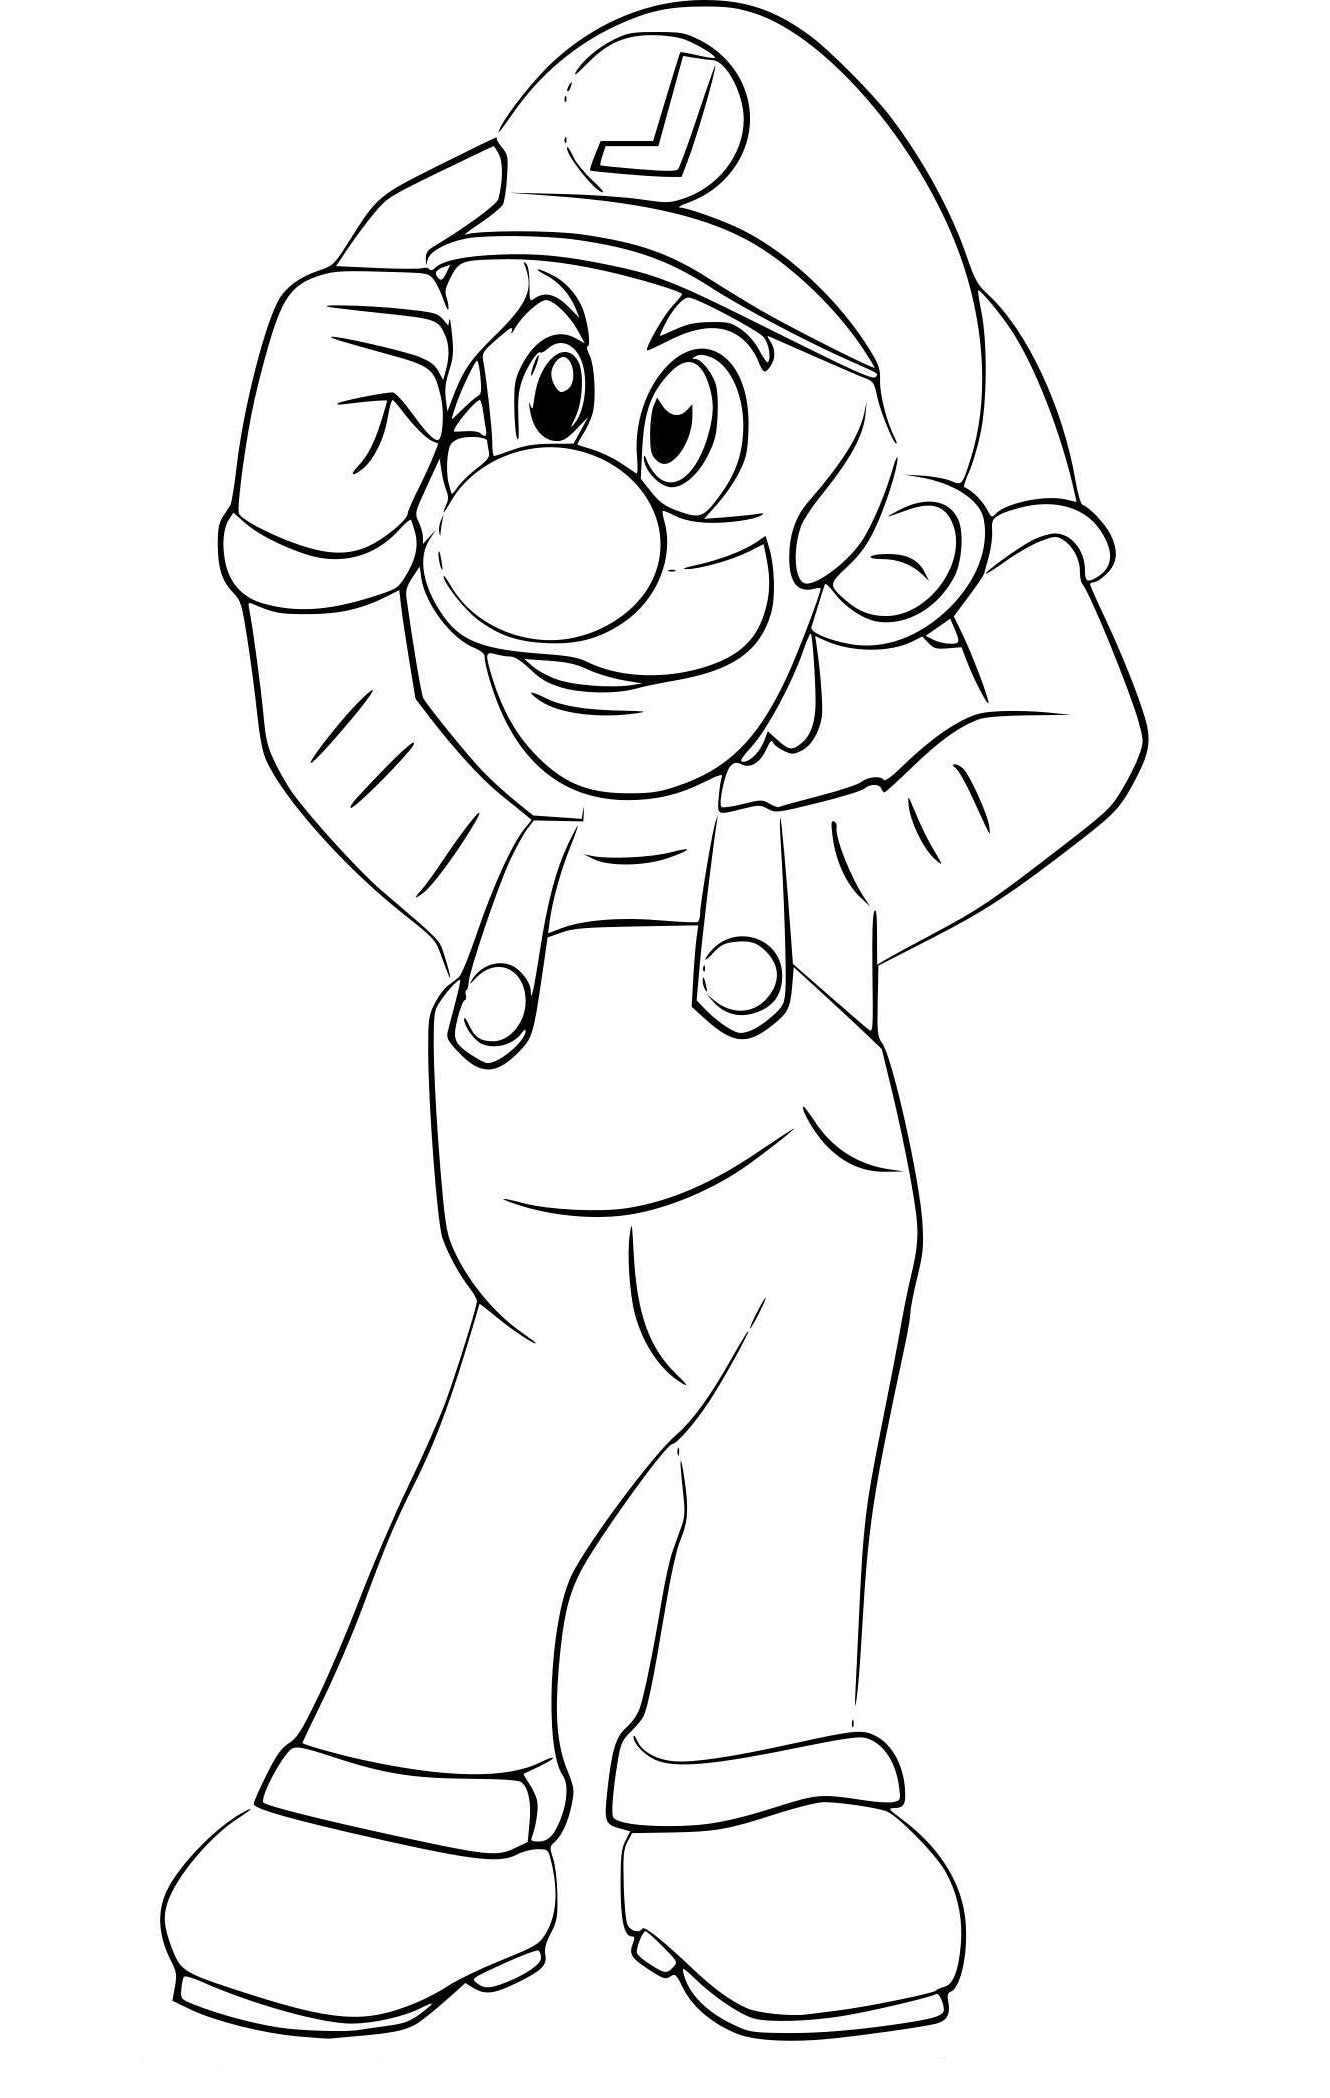 Dessin Personnage Mario Beau Images Search Results for “coloriage Imprimer Personnages Clbres